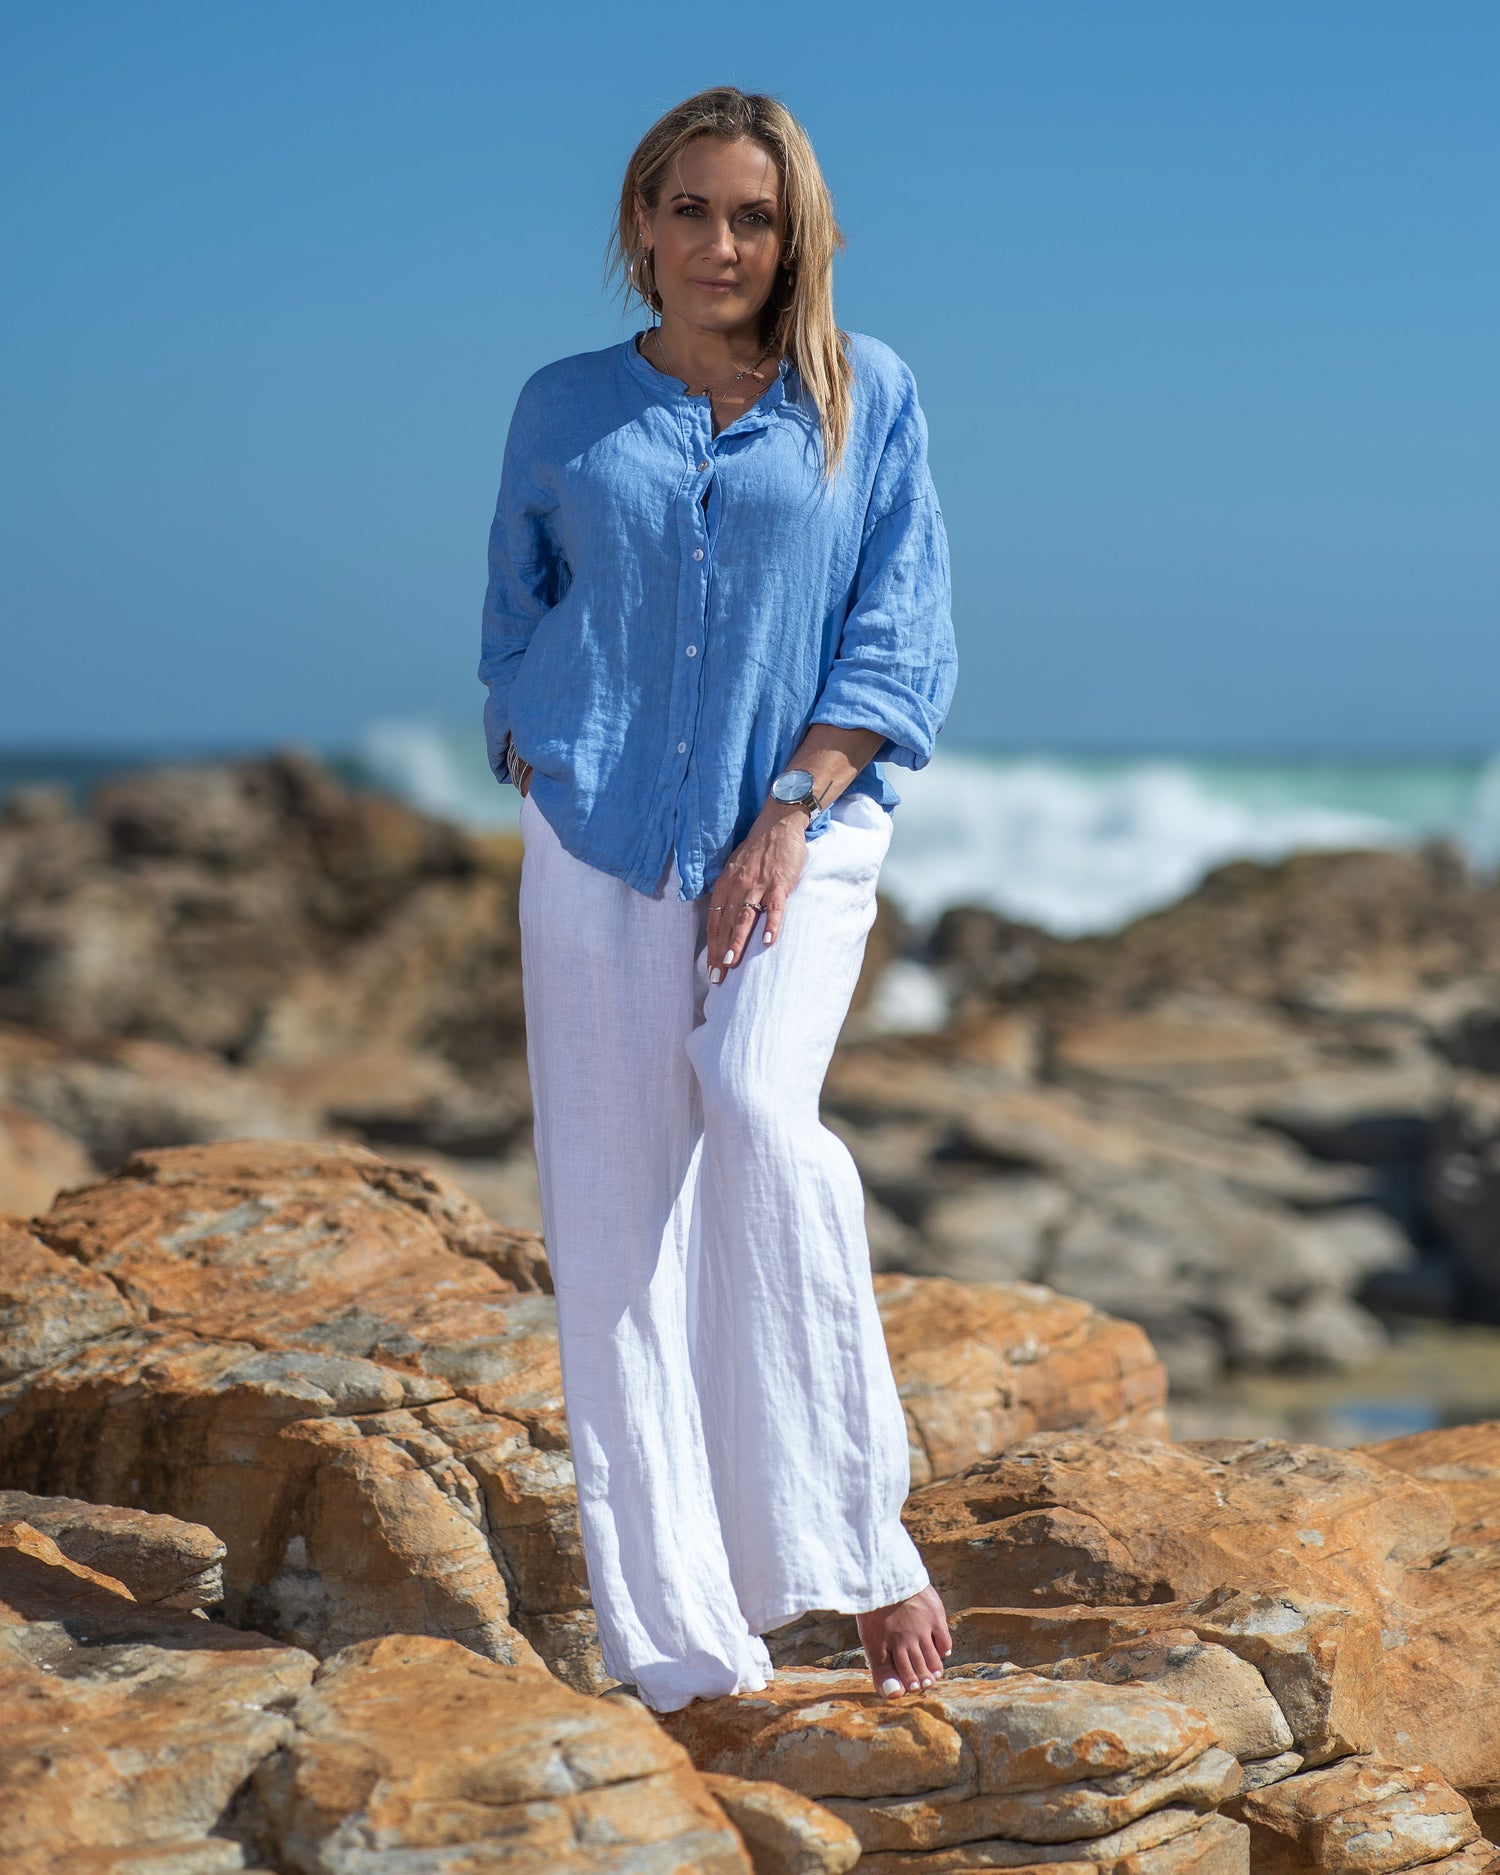 This beautiful linen top makes us all excited for summer, just around the corner! A celebration of delicate charm and timeless elegance. This top is designed to envelop you in the soft hues of summer and enhance your natural grace with its thoughtfully crafted design